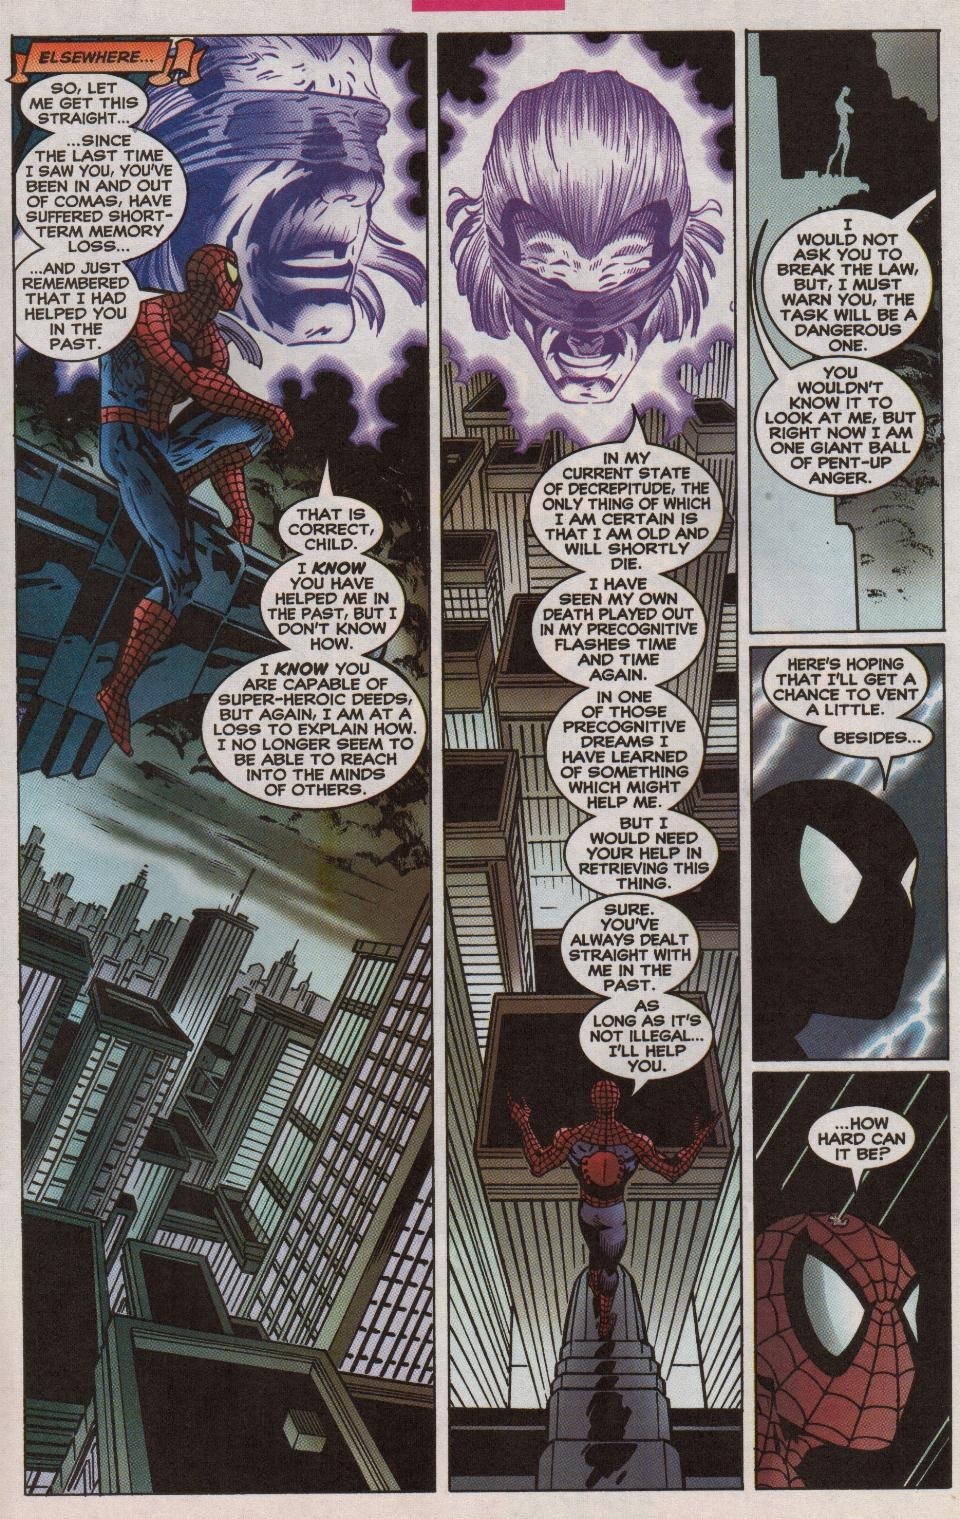 Madame Web astral projects, presumably from her home, to Spider-Man for help after she remembers him. Her telepathy around this time was still off after the Juggernaut incident, so at the moment, she can't read minds like she used to. (Spider-Man vol 1 #96)